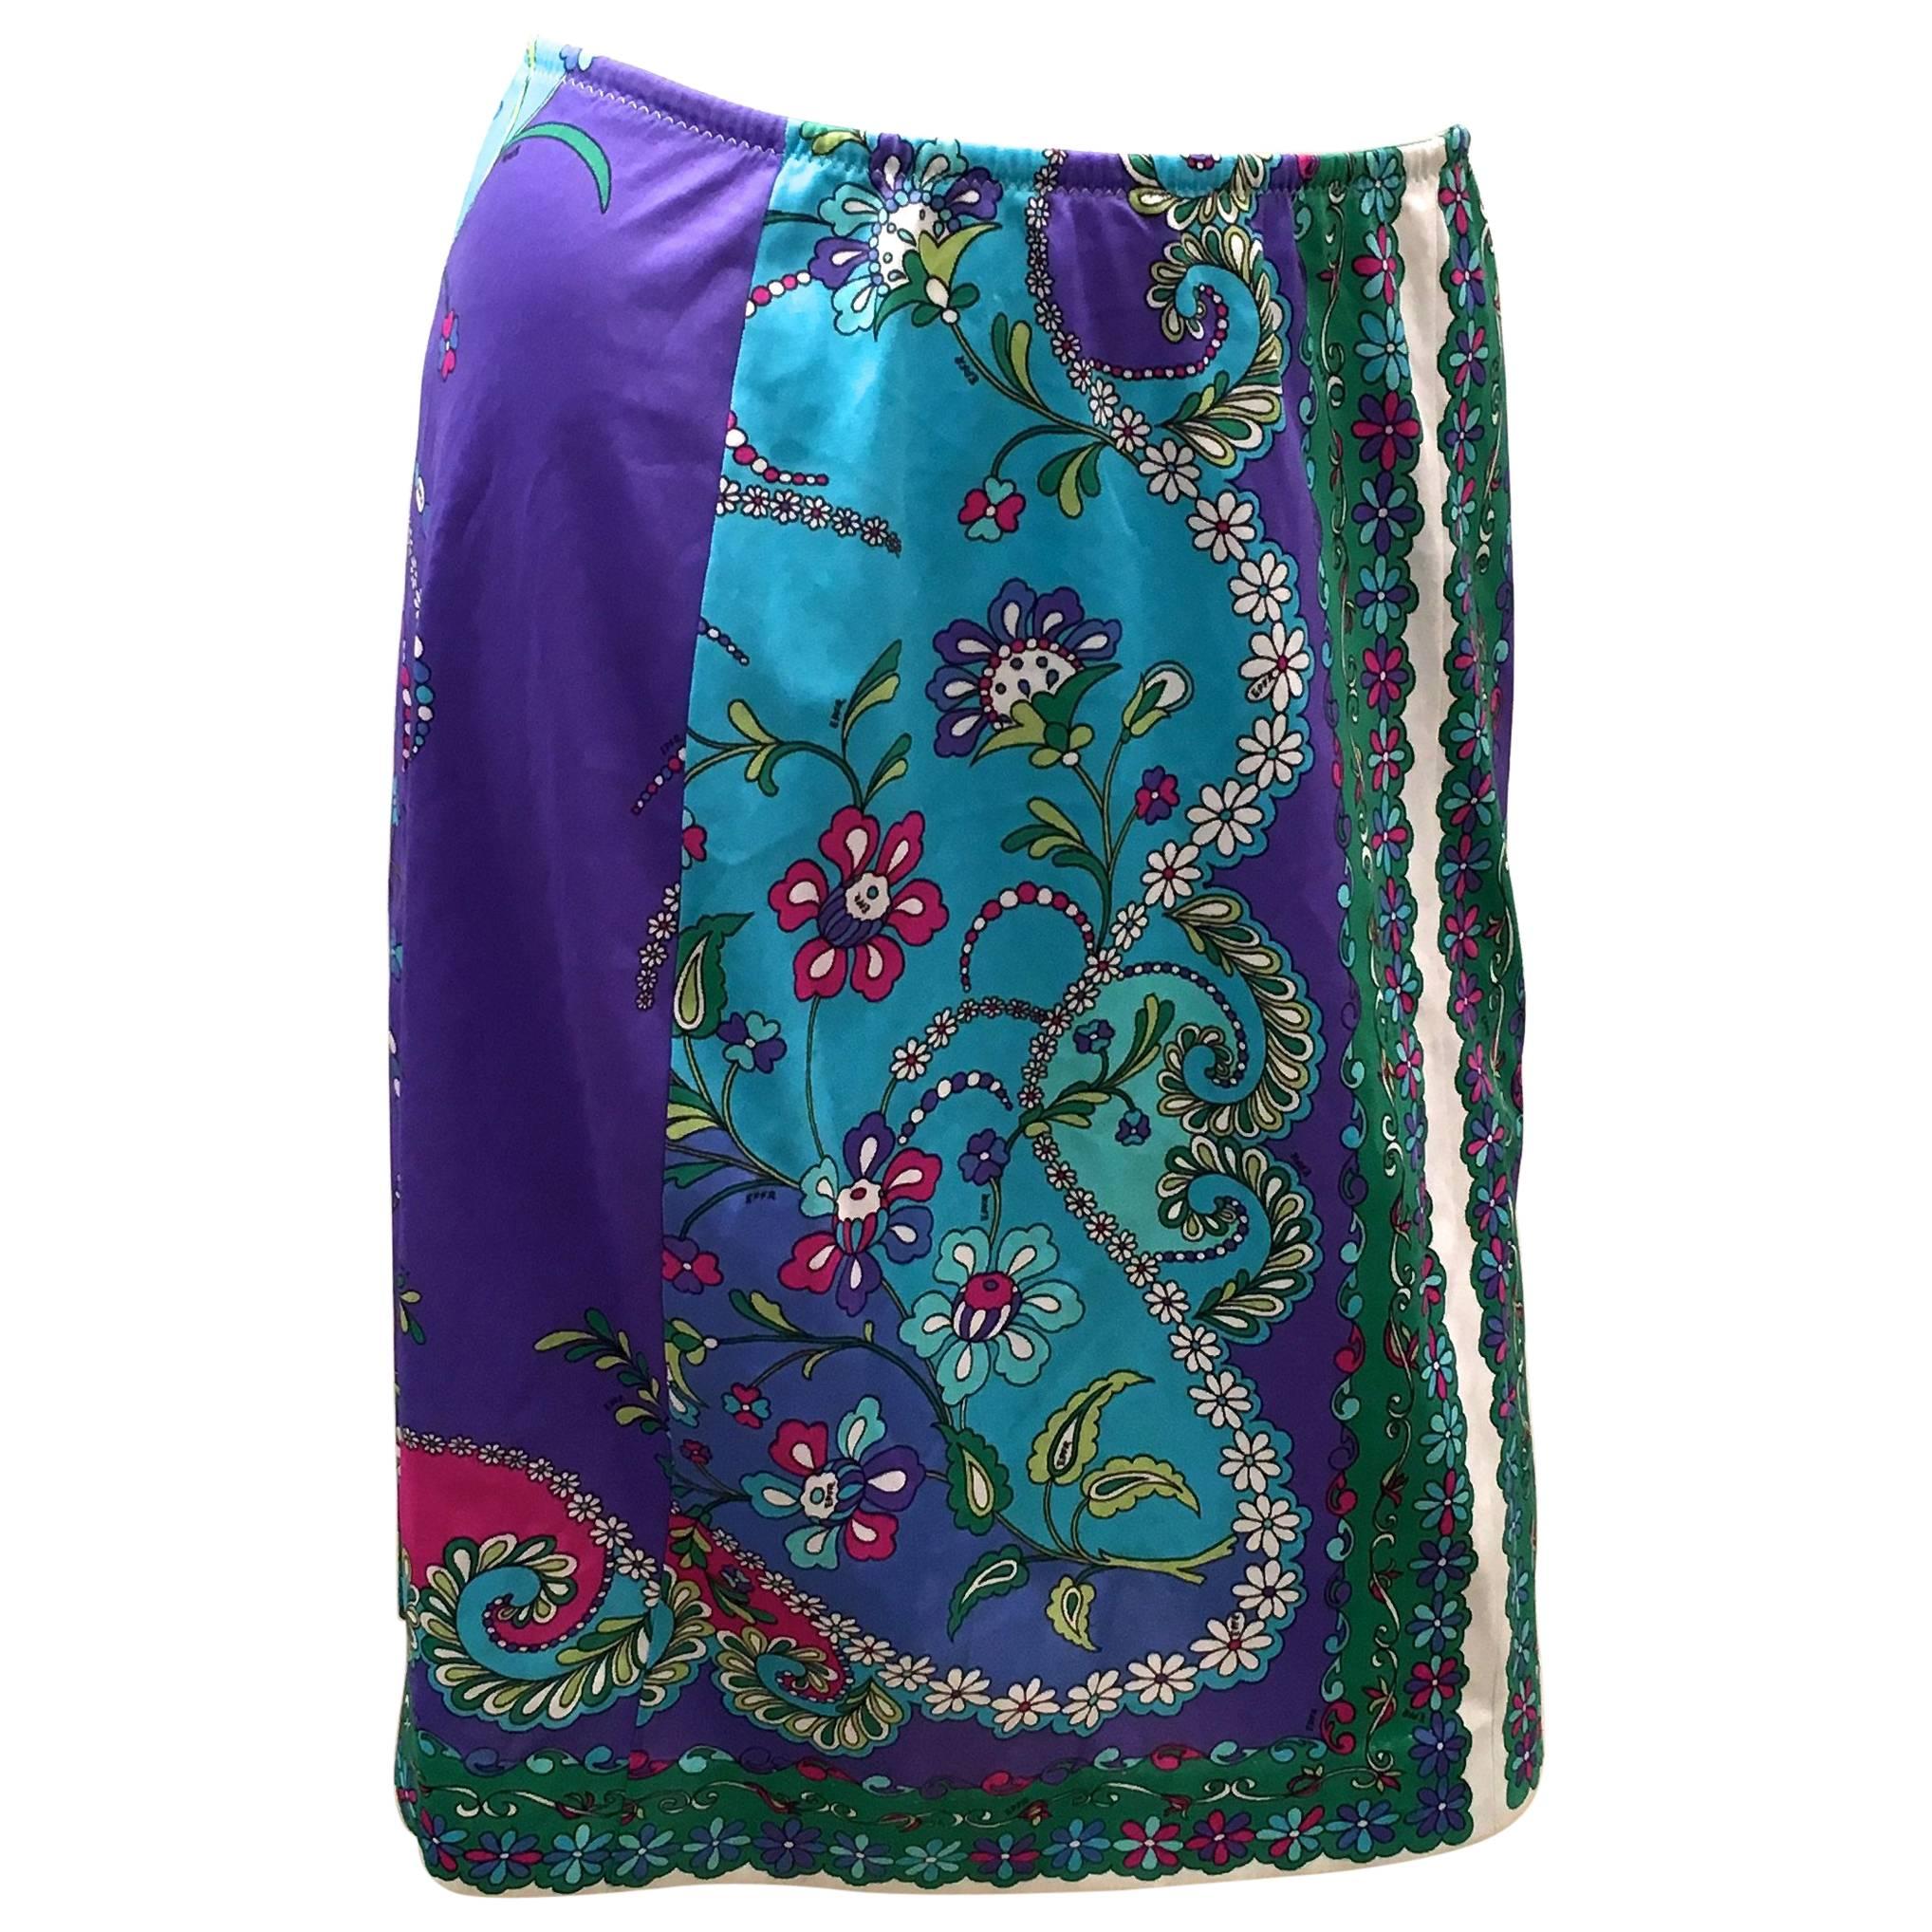 Vintage Pucci Skirt - Formfit Rogers - Late 1960's / Early 1970's For Sale